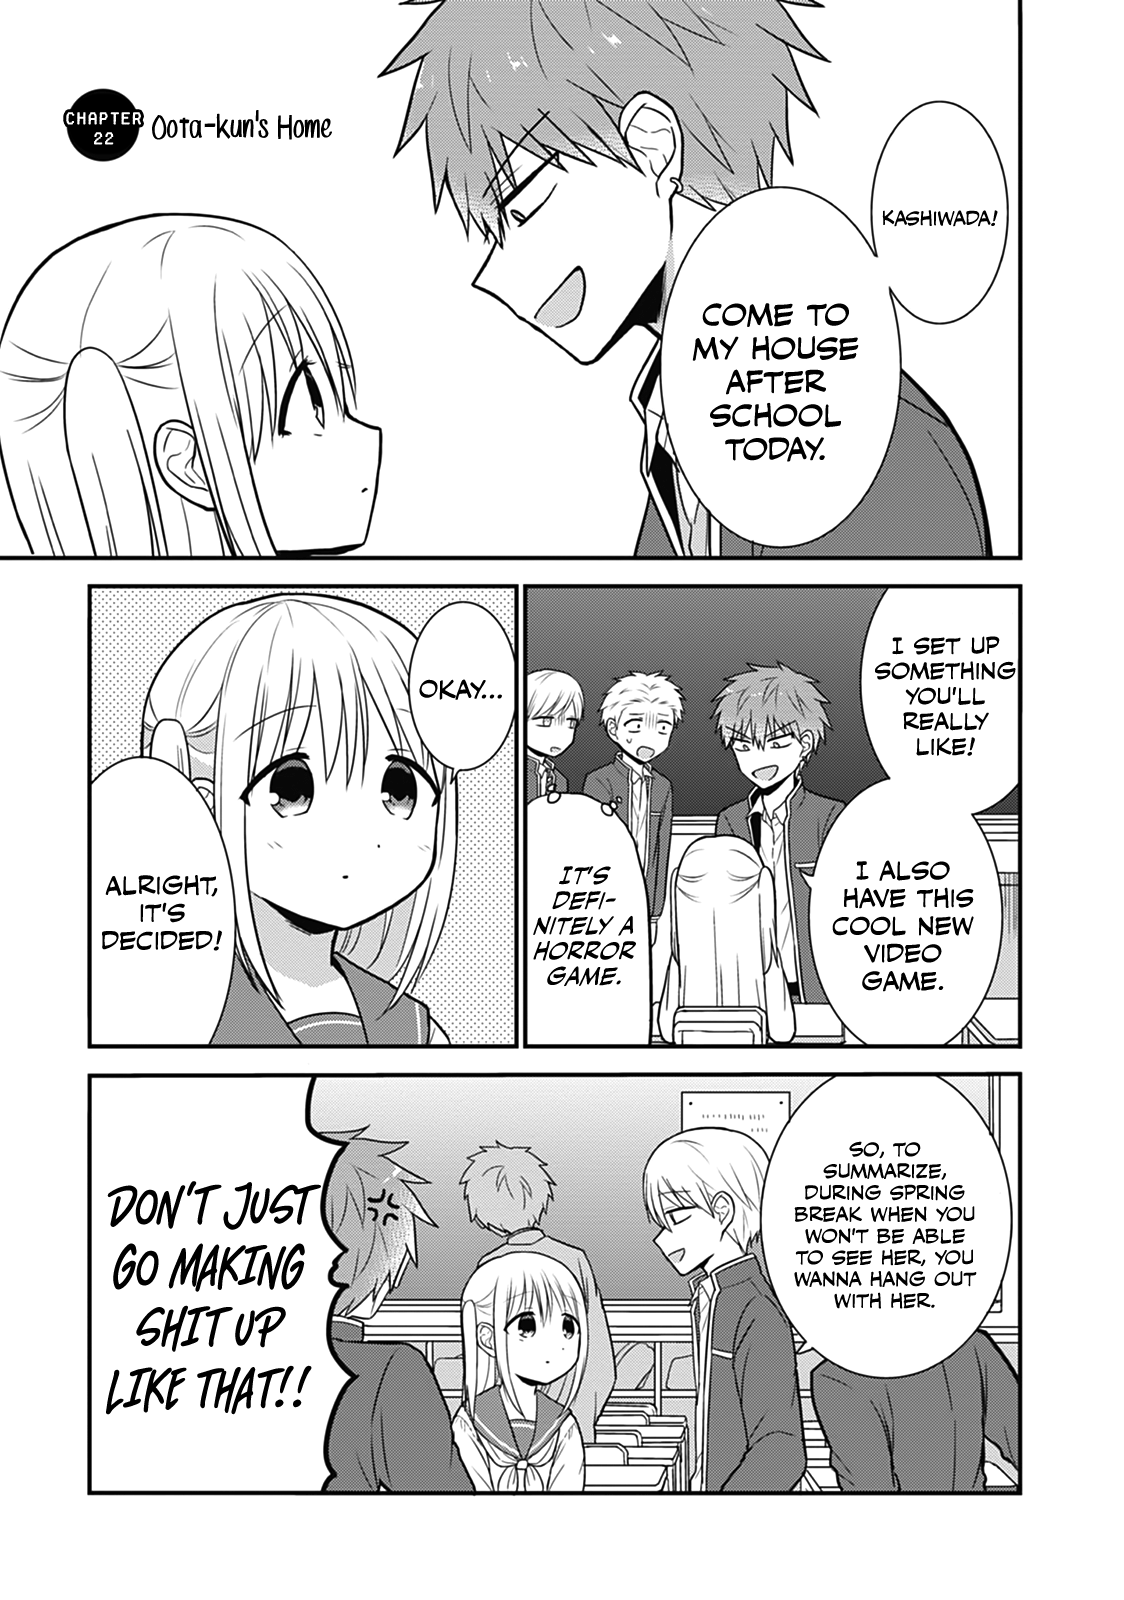 Expressionless Kashiwada-San And Emotional Oota-Kun Vol.2 Chapter 22: Oota-Kun's Home - Picture 1